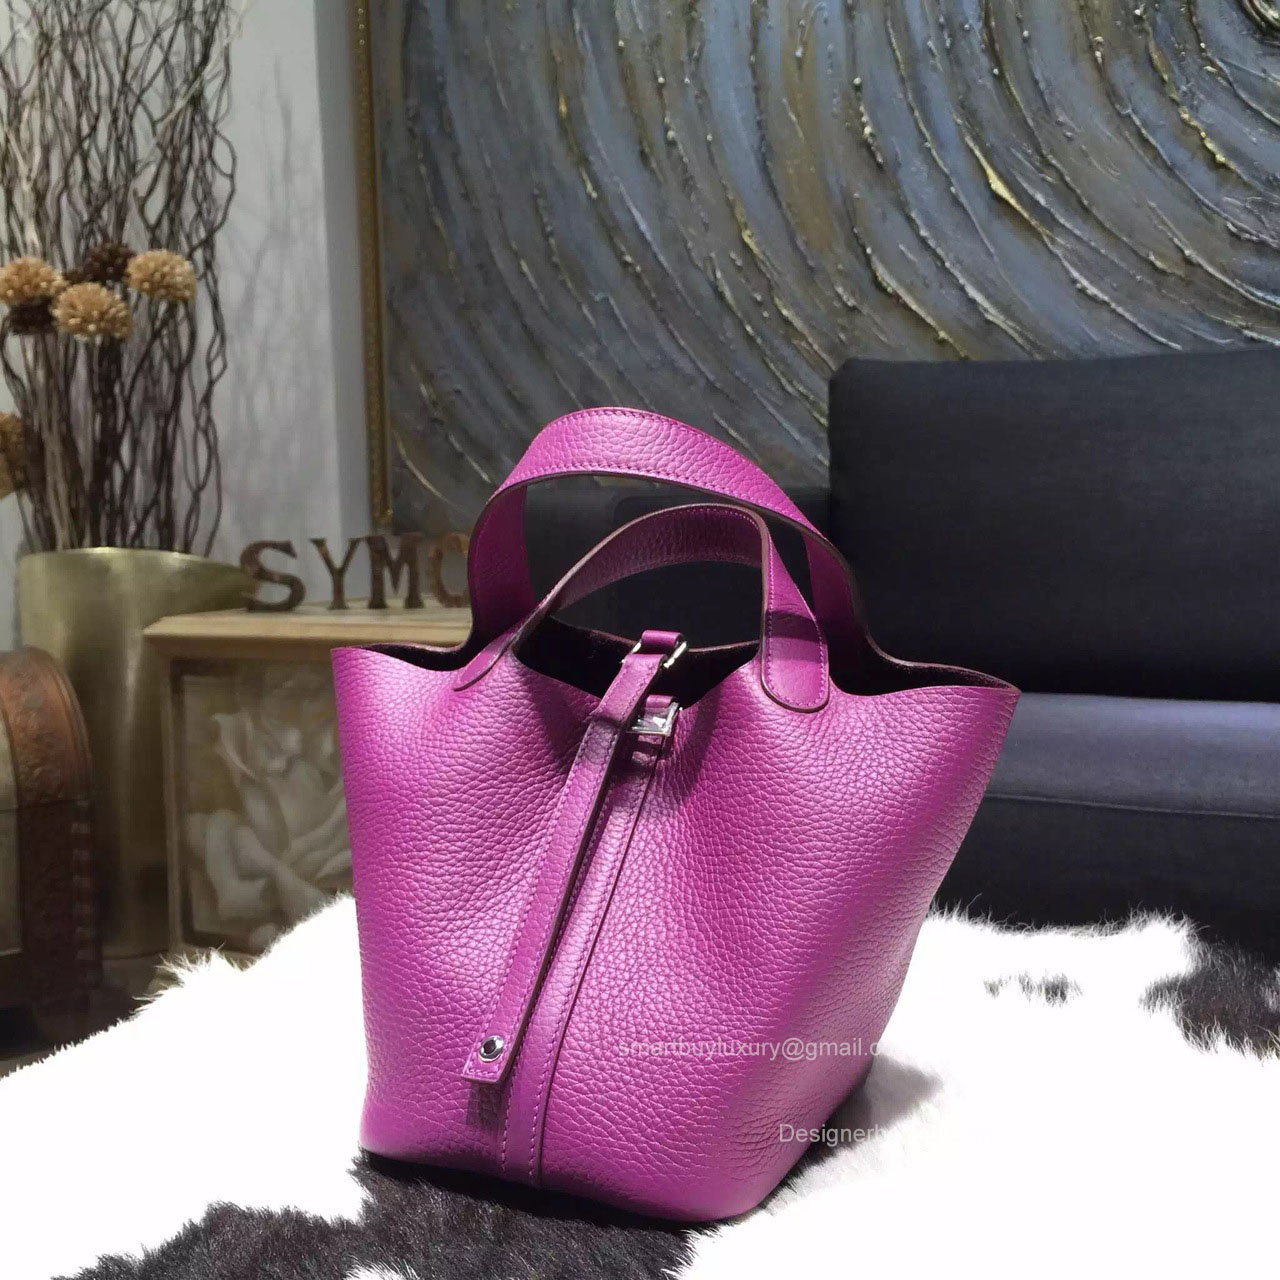 Hermes Picotin Lock 22 Bag Anemone P9 Taurillon Clemence Handstitched